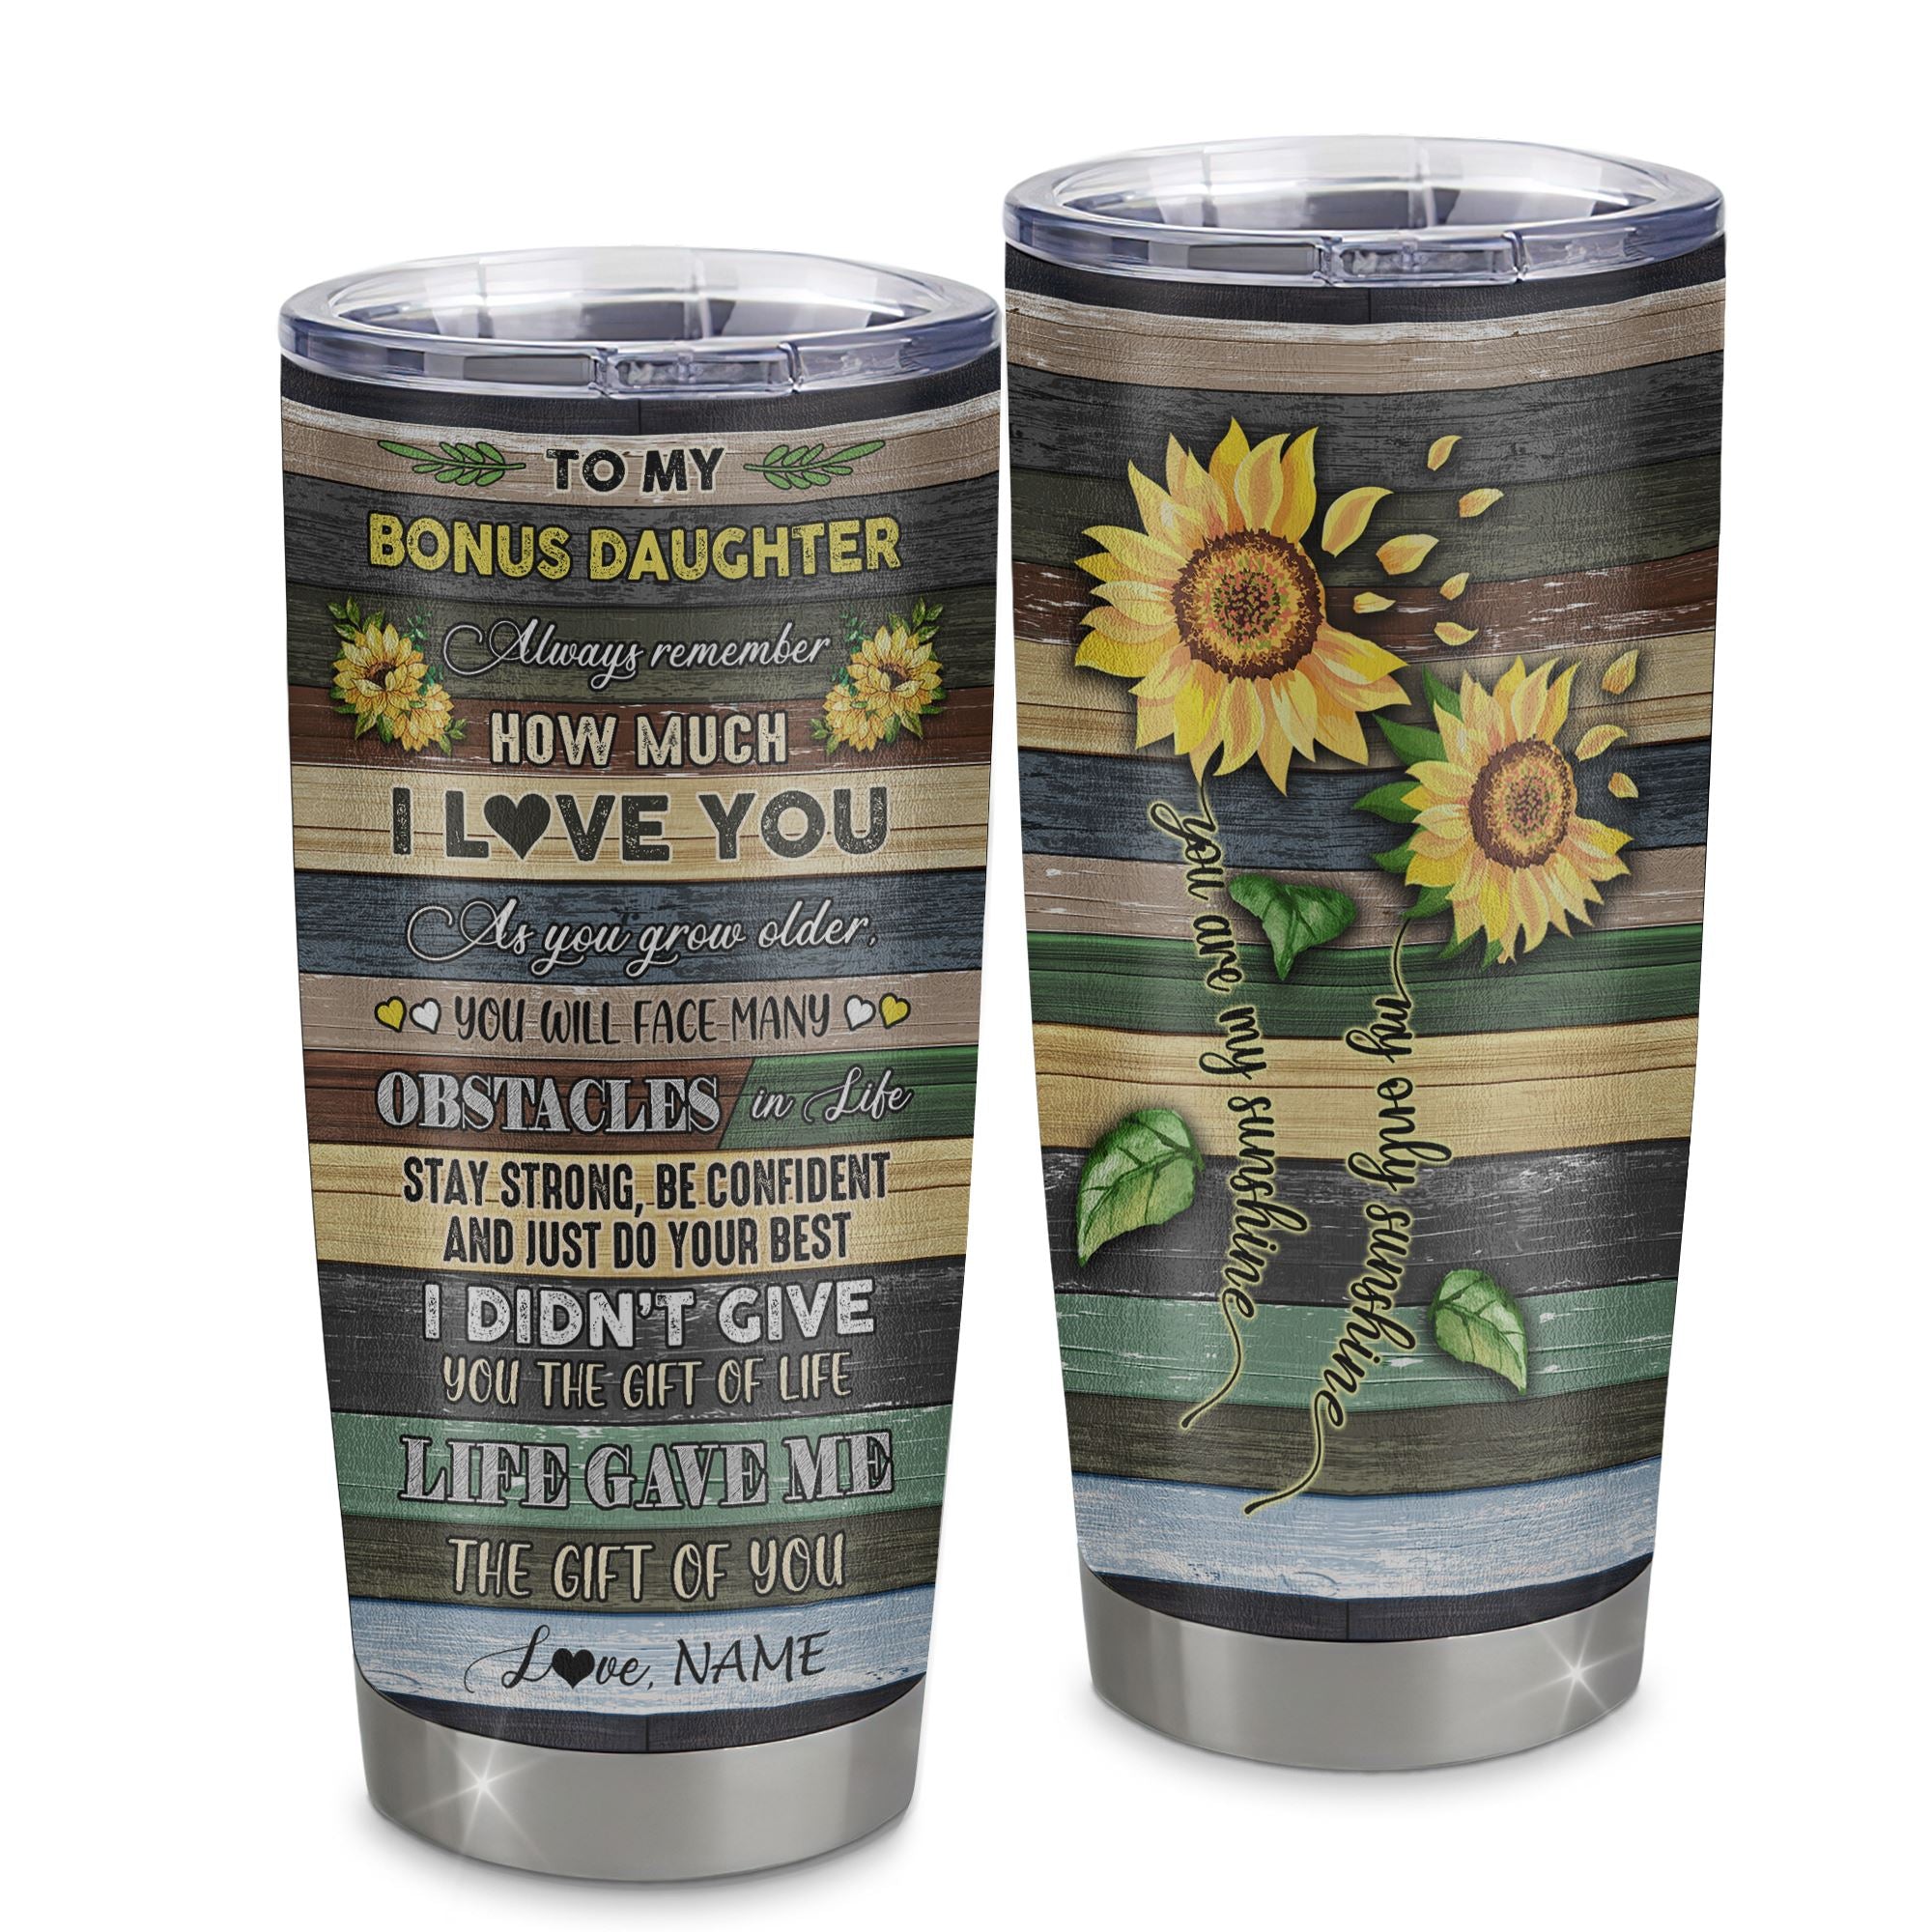 Personalized_To_My_Bonus_Daughter_From_Step_Mom_Stainless_Steel_Tumbler_Cup_Always_Remember_How_Much_I_Love_You_Wood_Sunflower_Stepdaughter_Birthday_Christmas_Travel_Mug_Tumbler_mocku-2.jpg